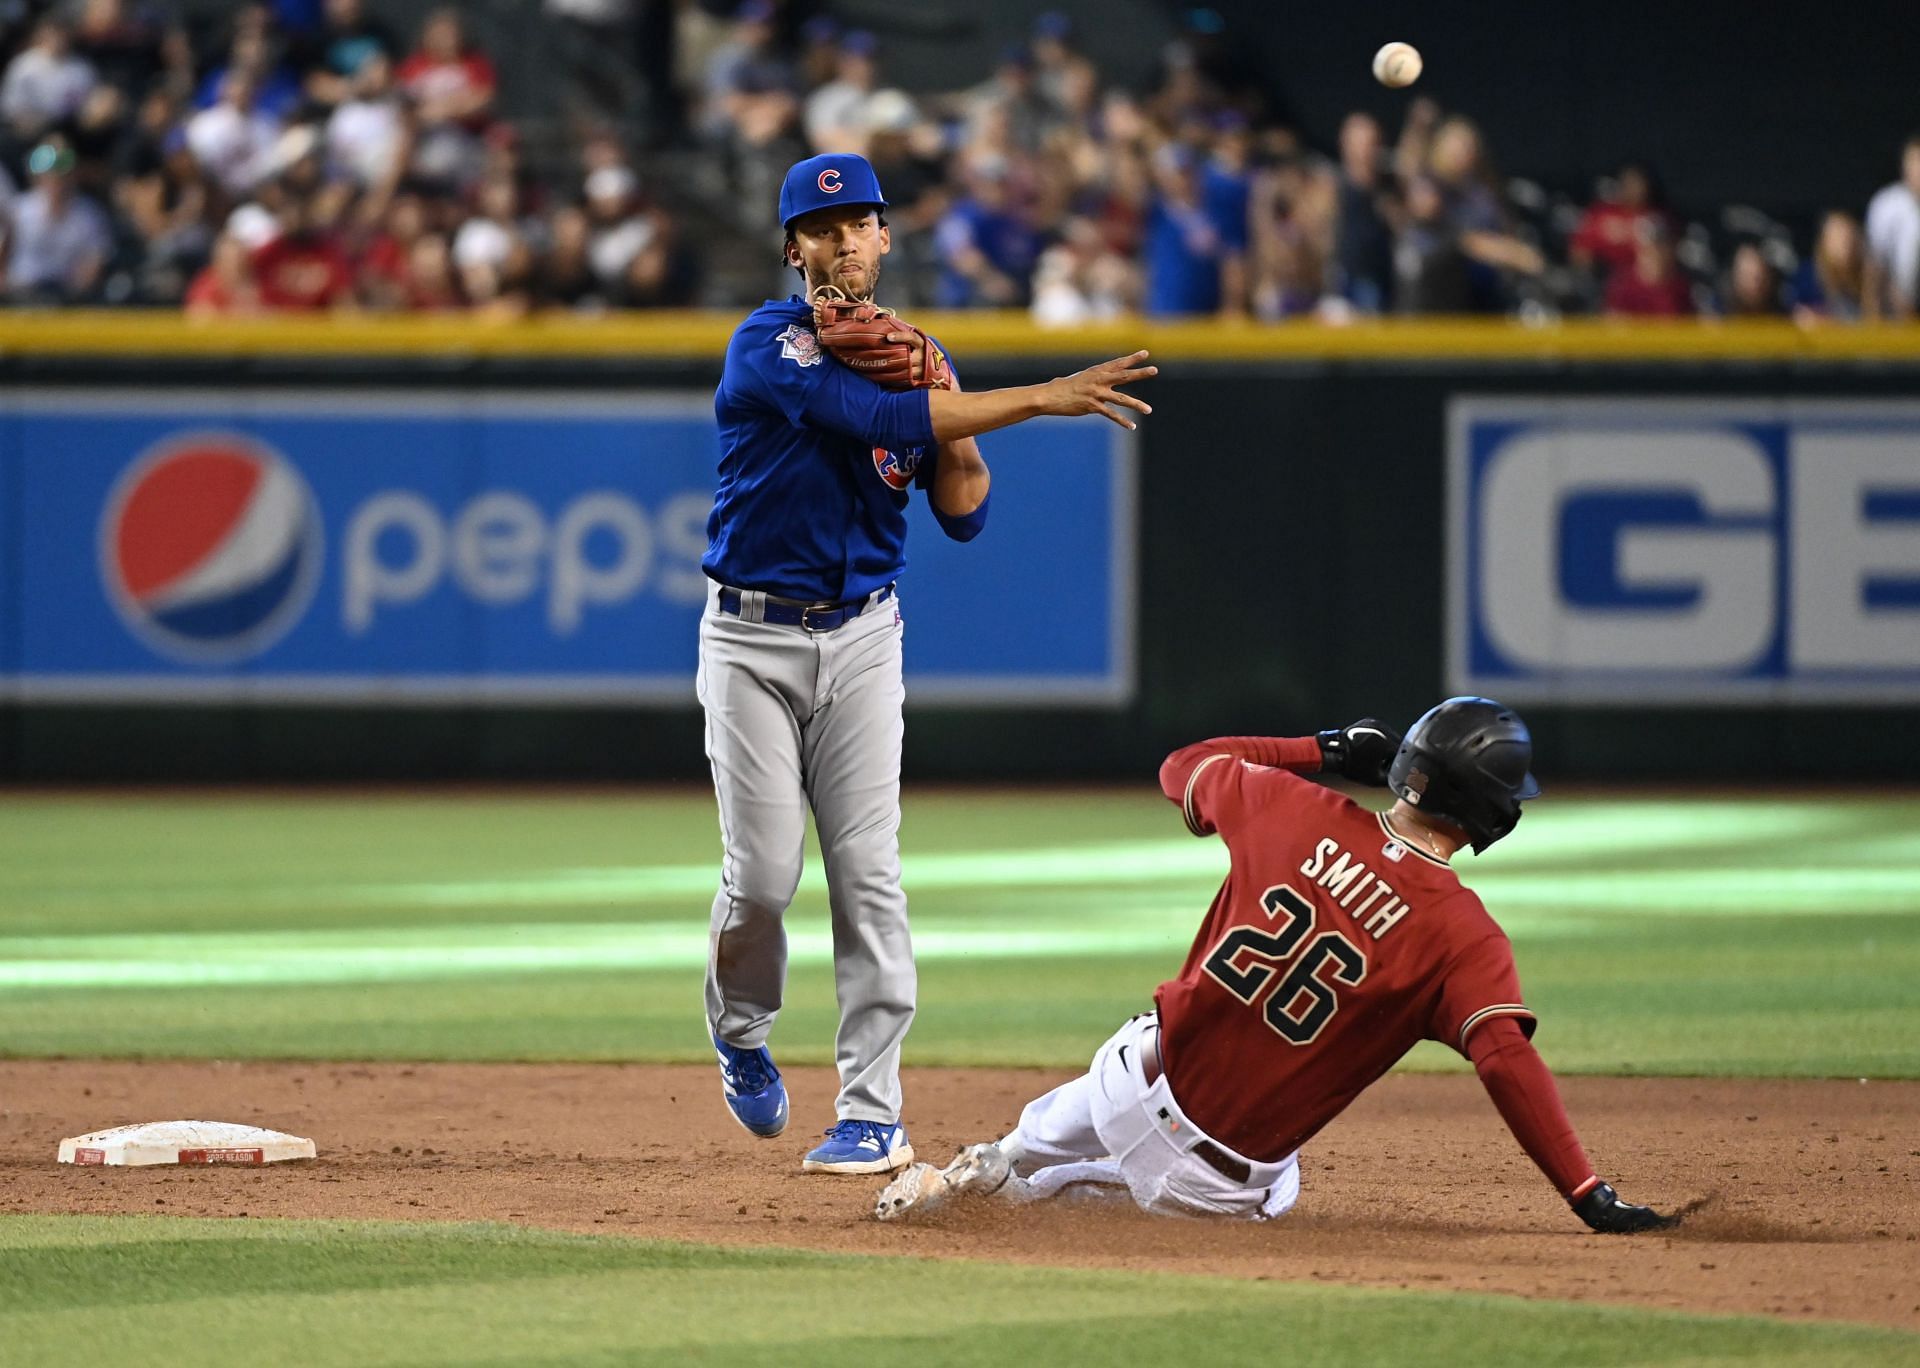 Chicago Cubs shortstop Andrelton Simmons surrendered five runs in the eight inning to the Cincinnati Reds